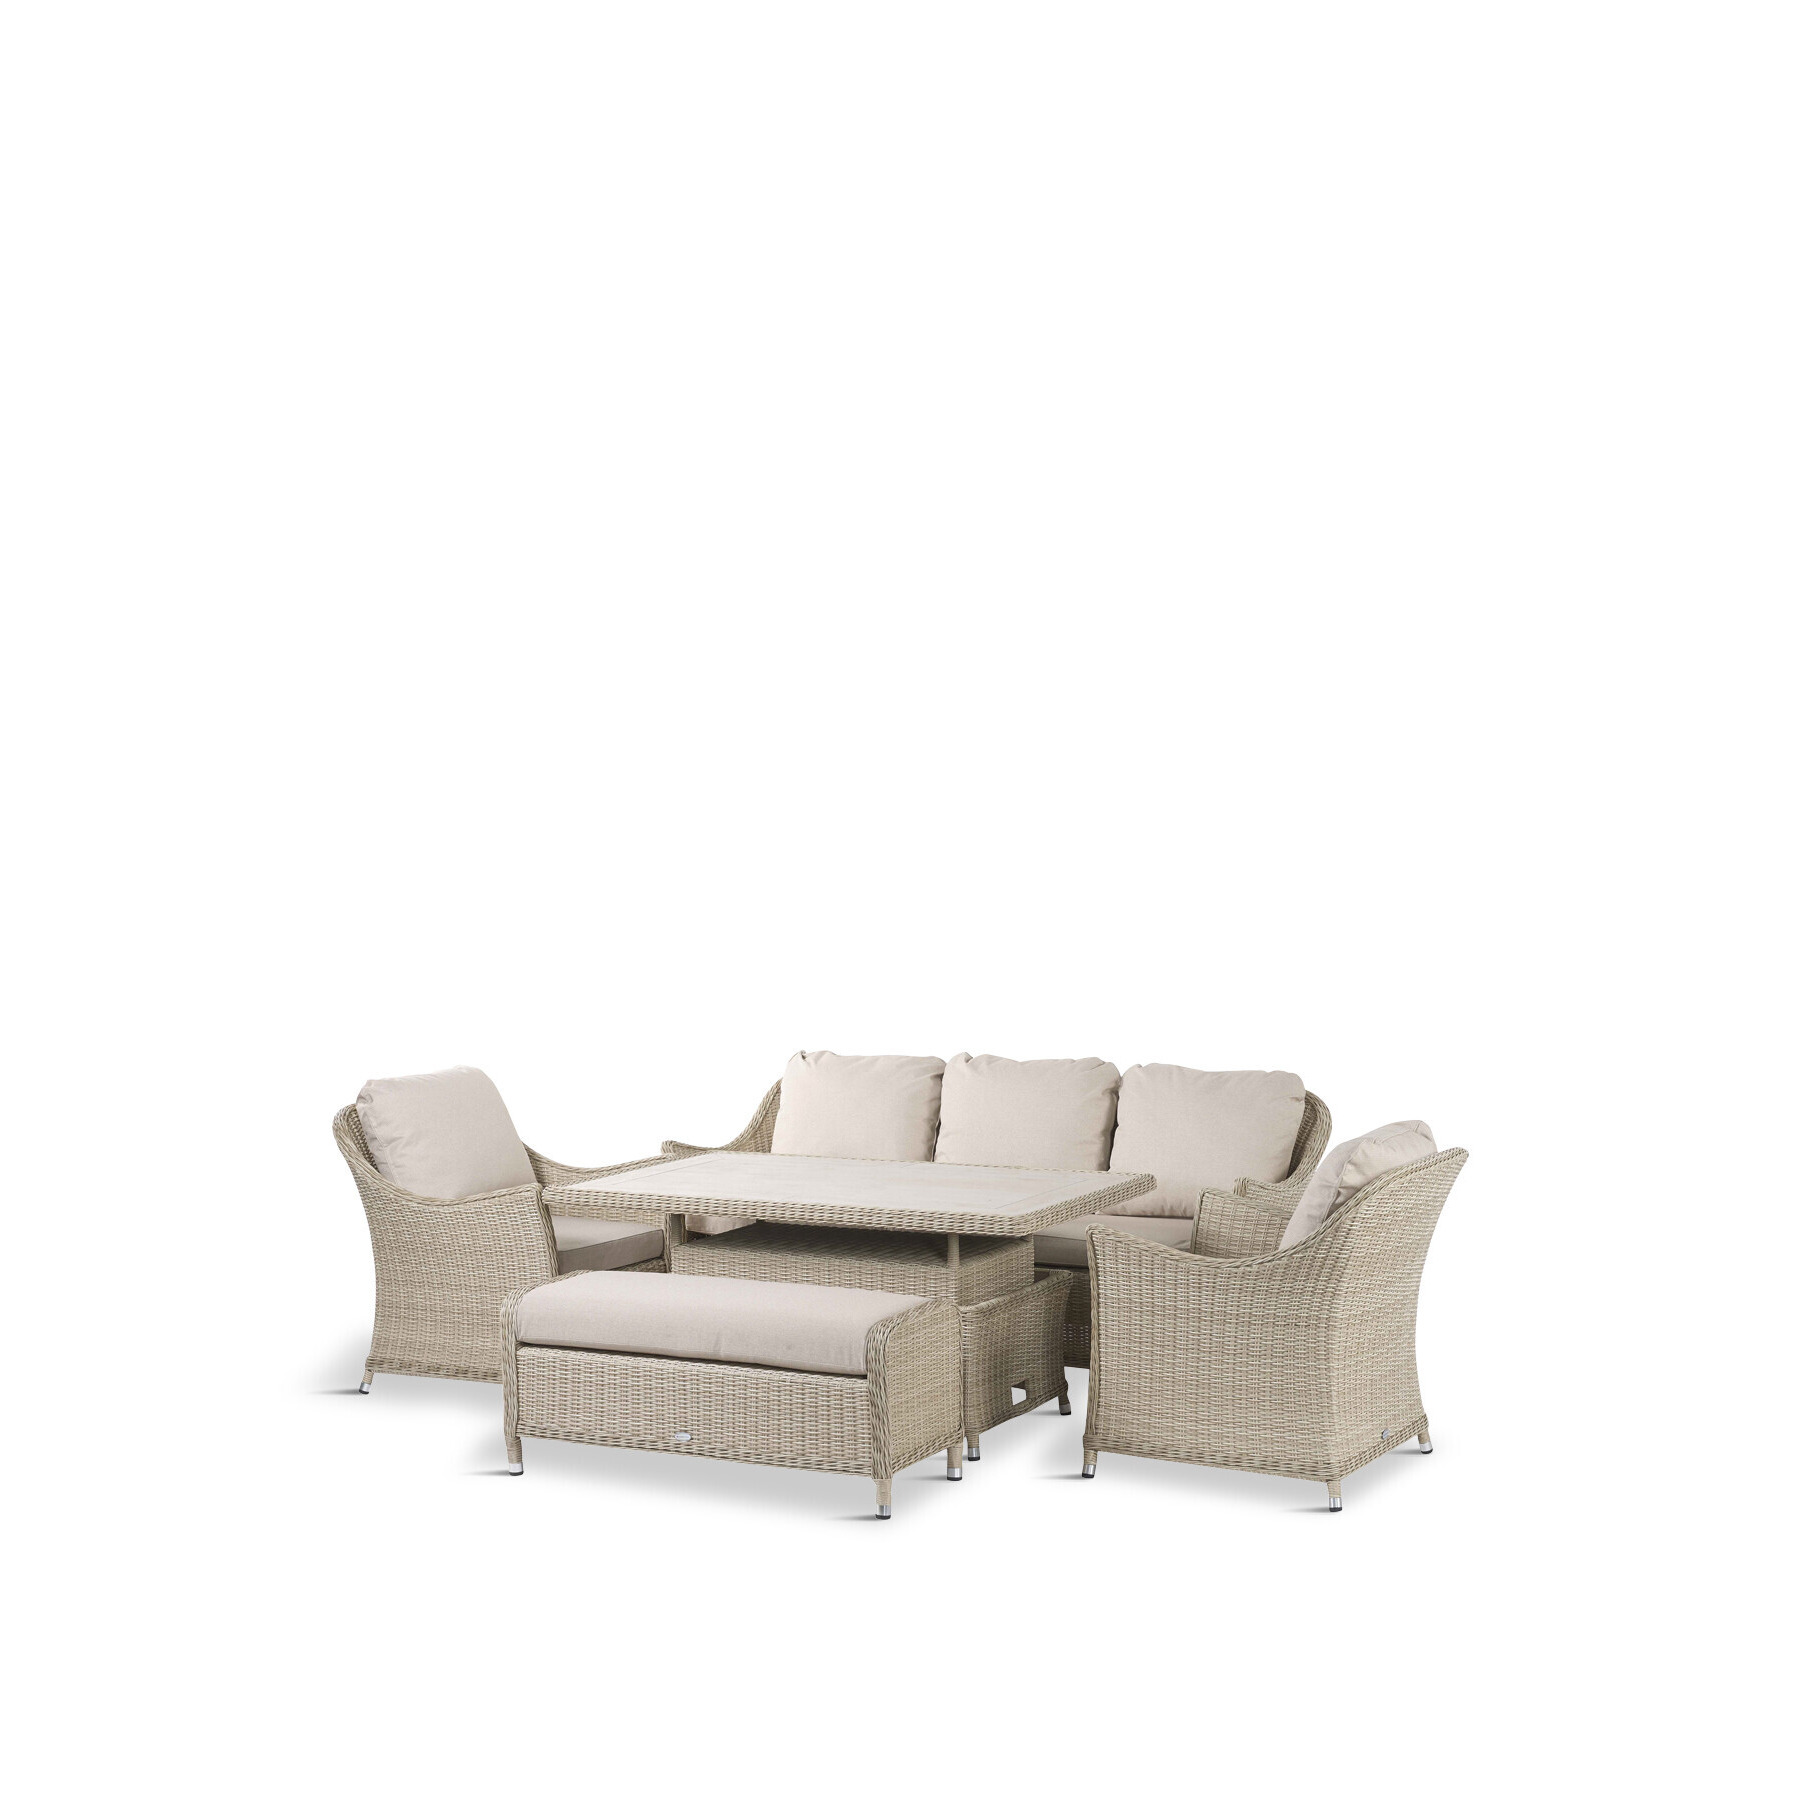 Bramblecrest Rattan 3 Seater Sofa With Dual Height Rectangle Table, 2 Armchairs & Bench Neutral - image 1